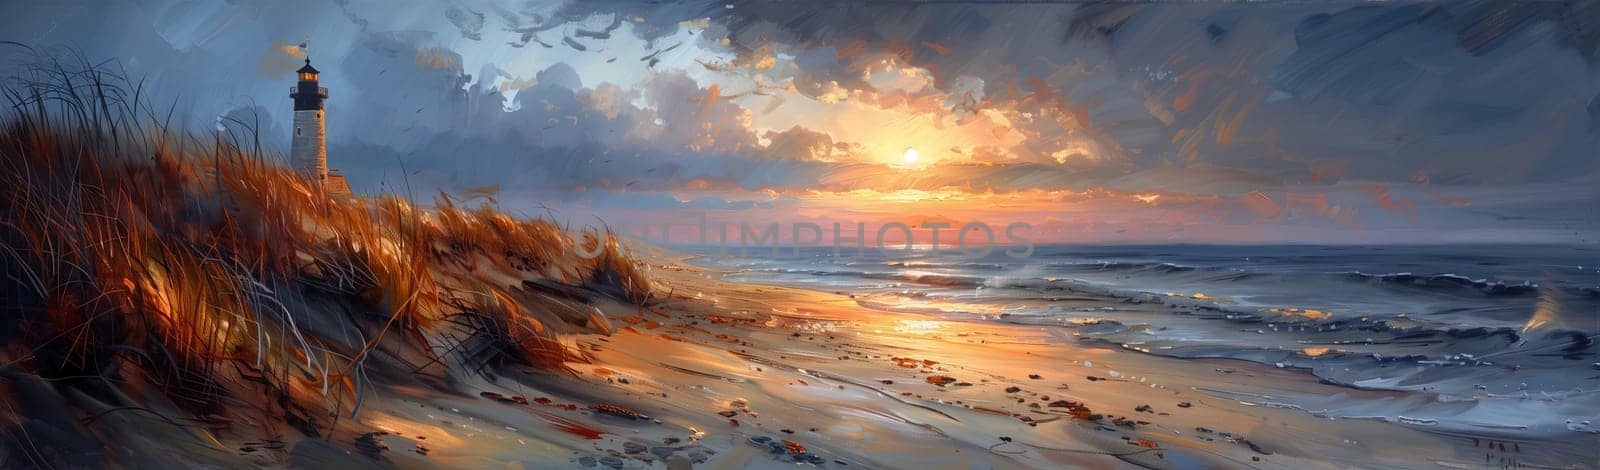 A stunning art piece depicting a natural landscape of a beach with a sunset in the background, featuring cumulus clouds, calm water, and a colorful sky